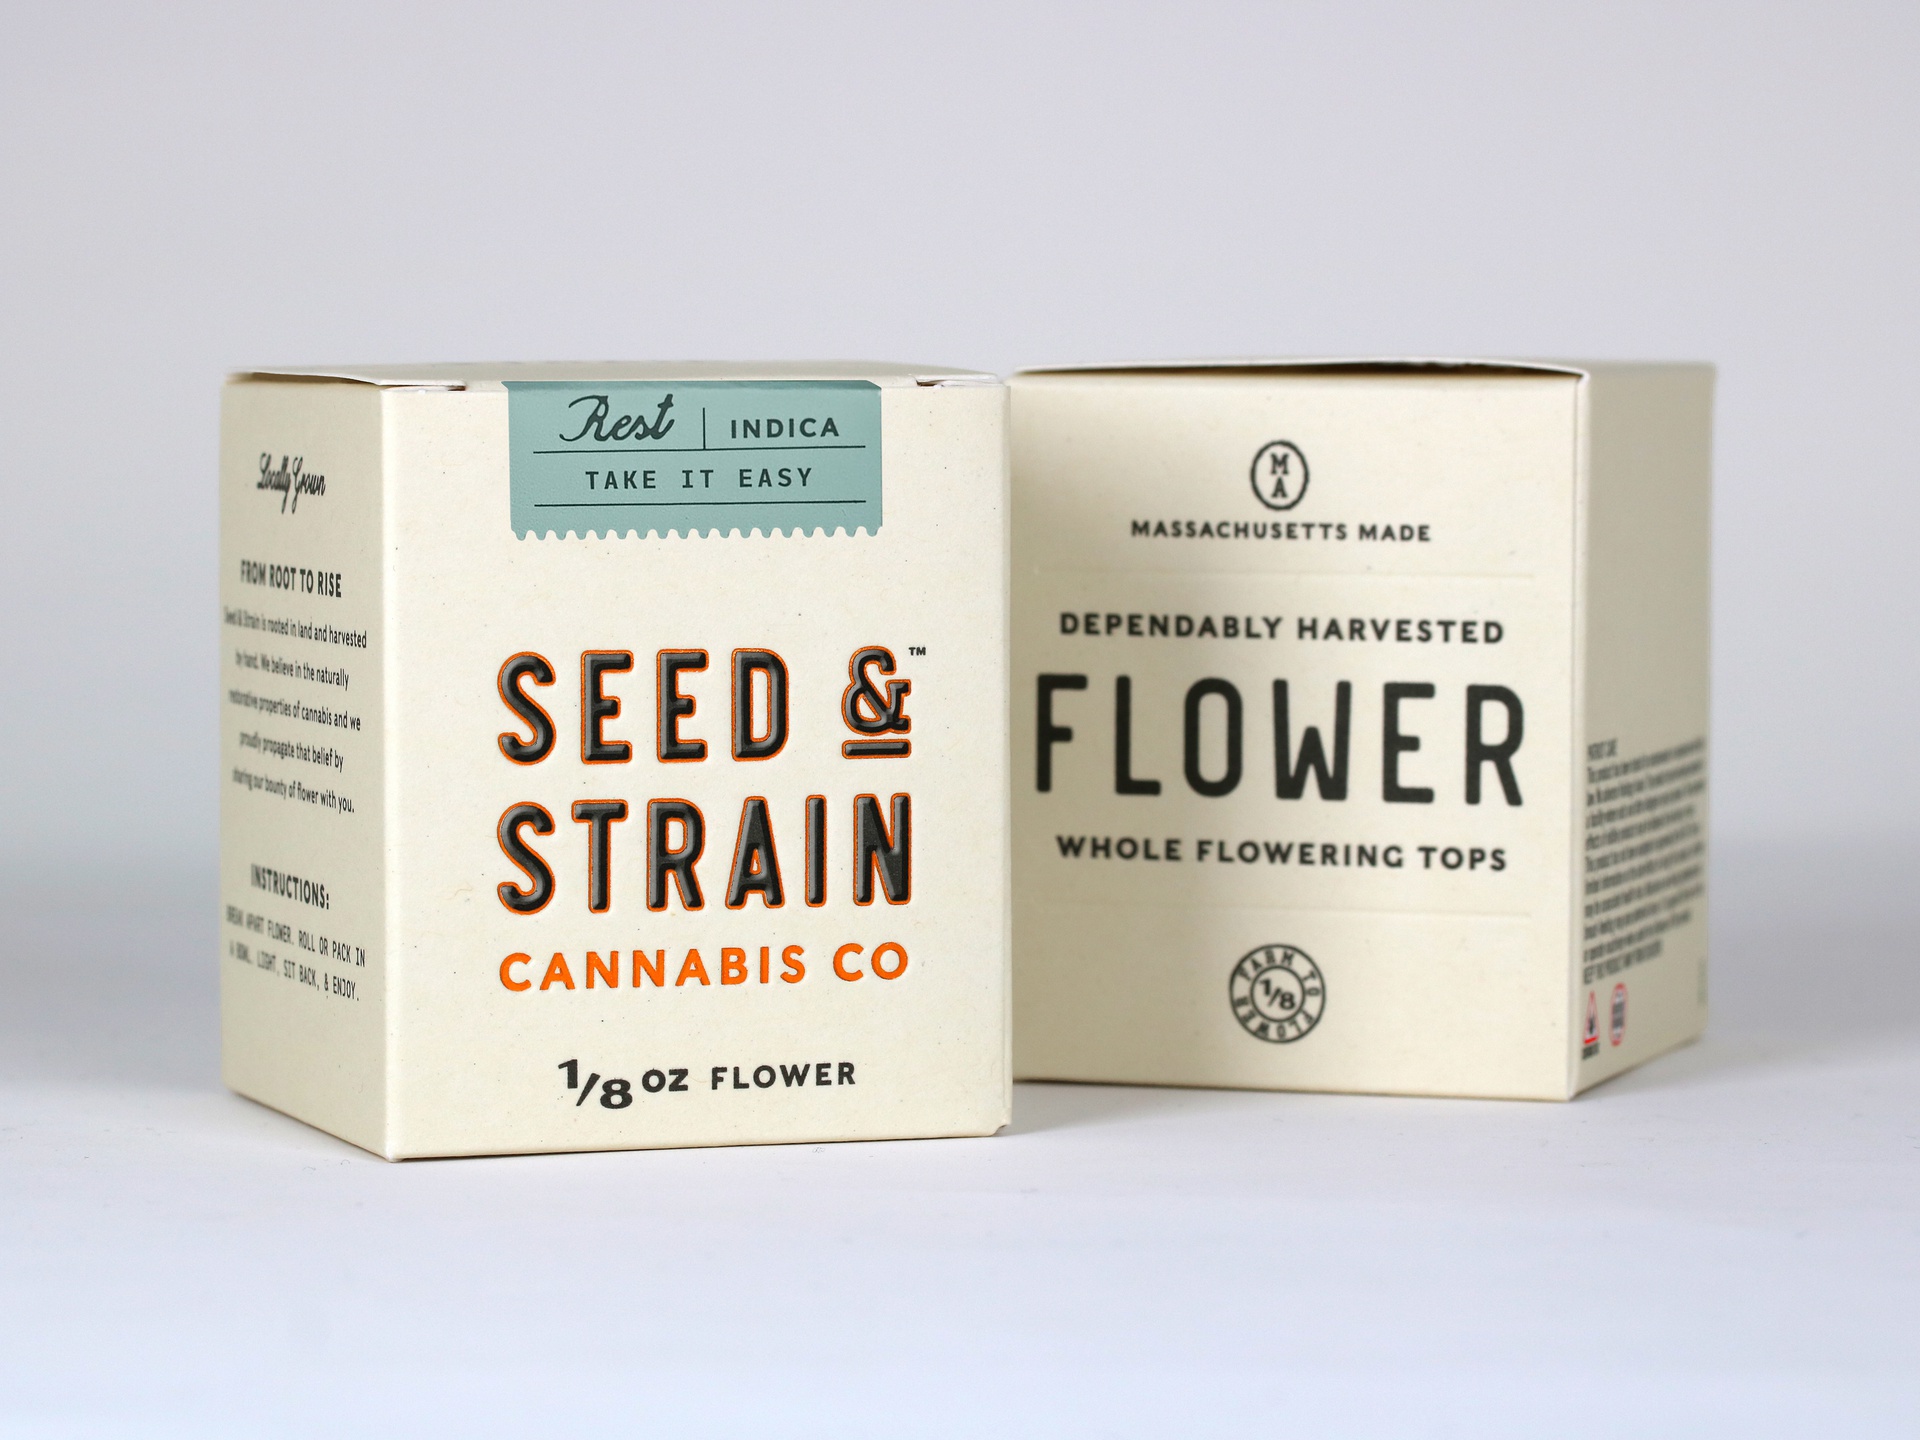 Columbia Care Seed & Strain cannabis packaging features hot foil stamping and debossing on FSC-certified 100% PCW paperboard.